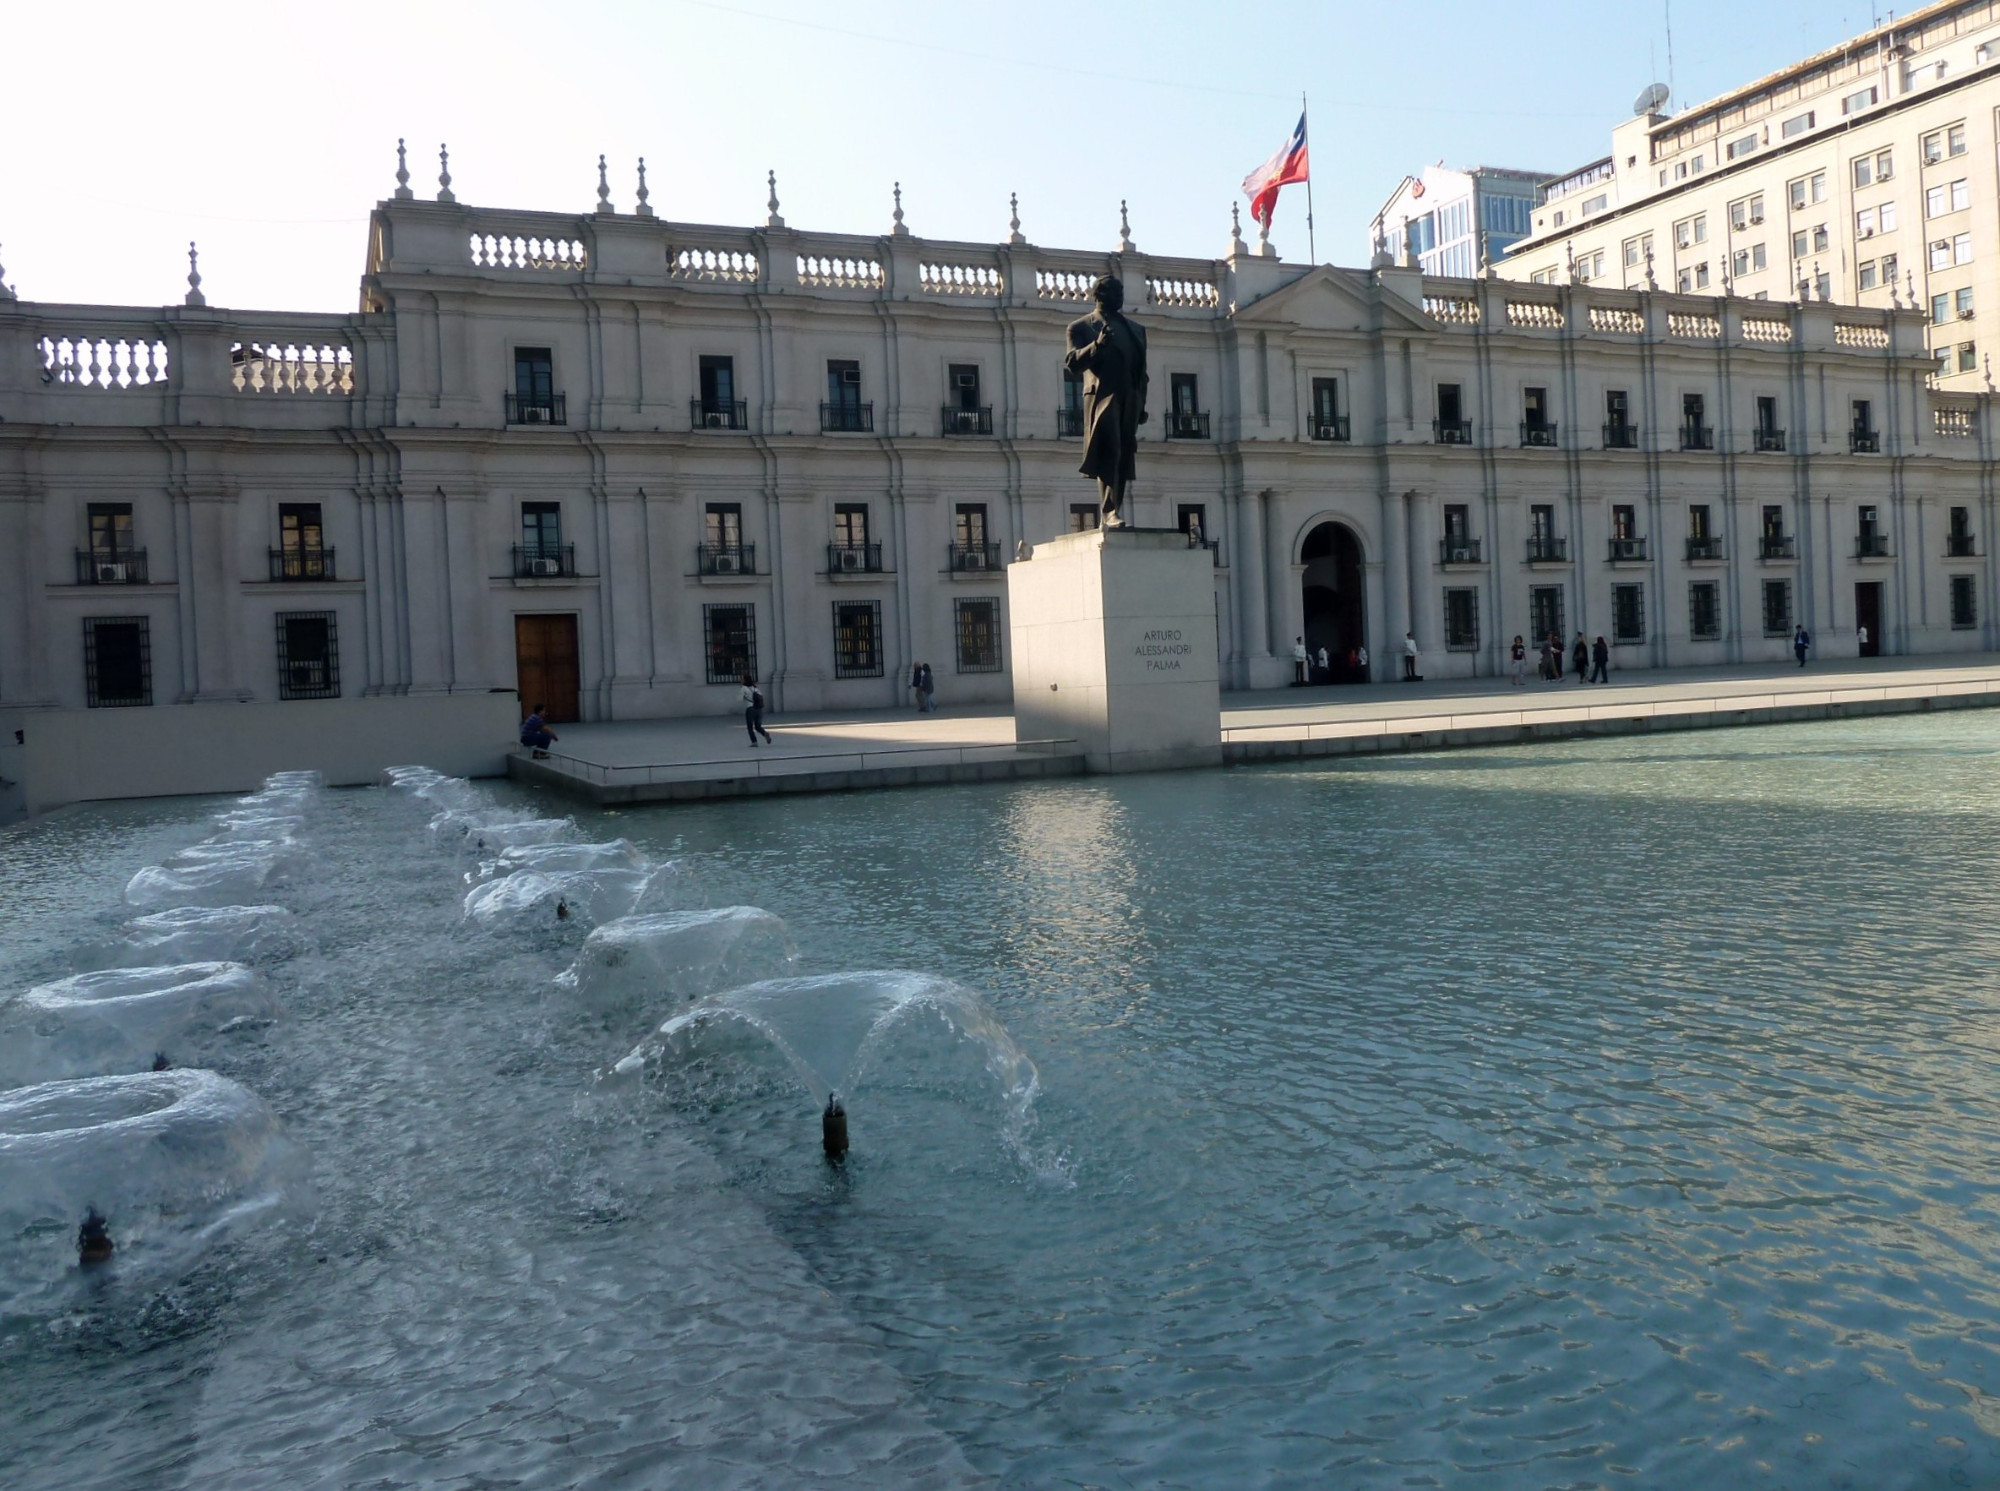 La Moneda Palace<br/>
State government office